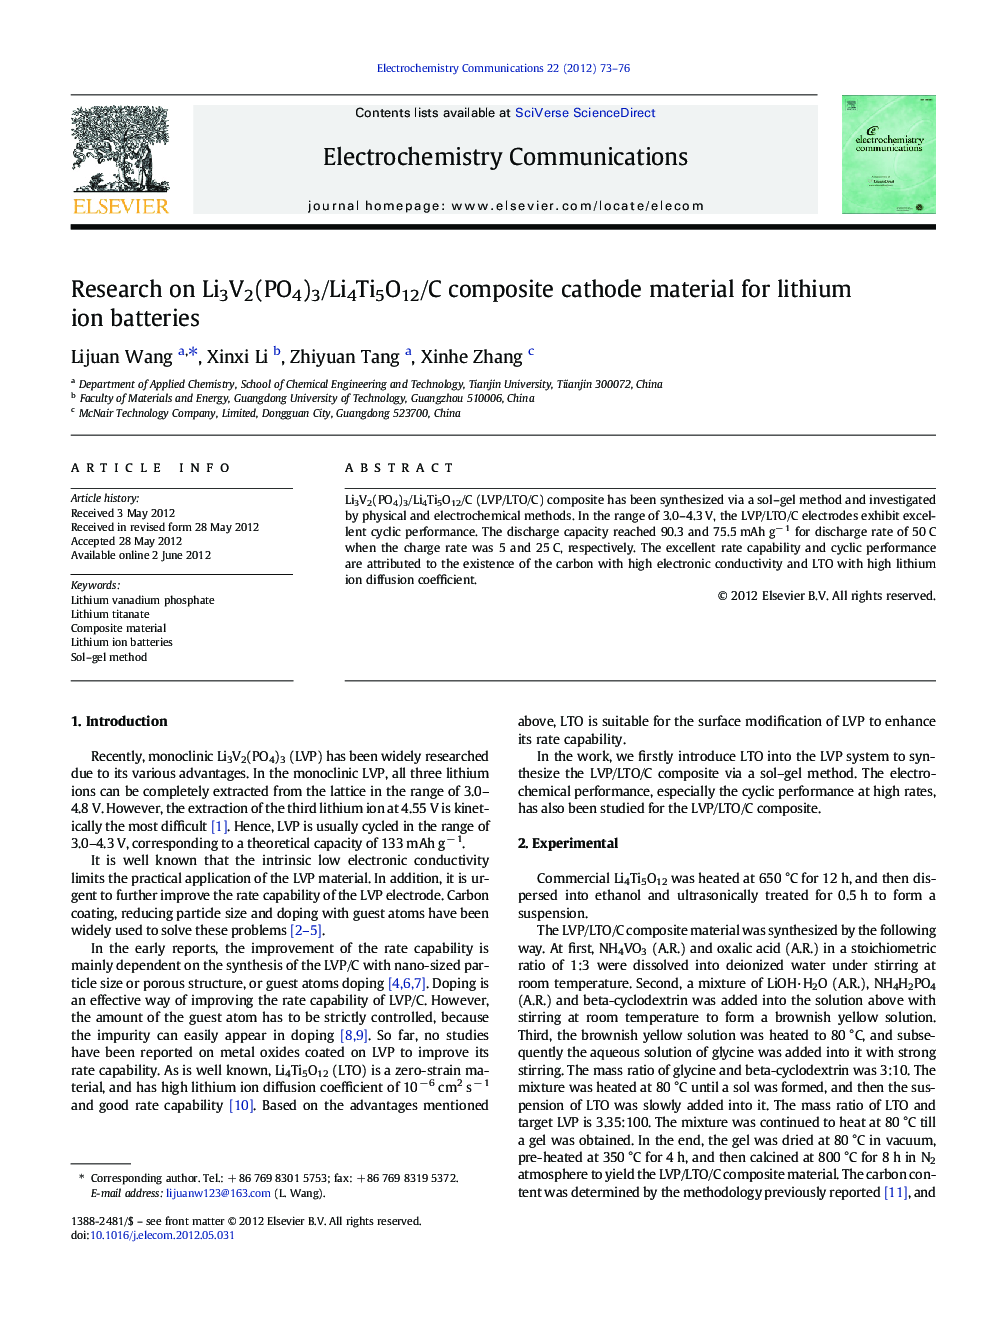 Research on Li3V2(PO4)3/Li4Ti5O12/C composite cathode material for lithium ion batteries